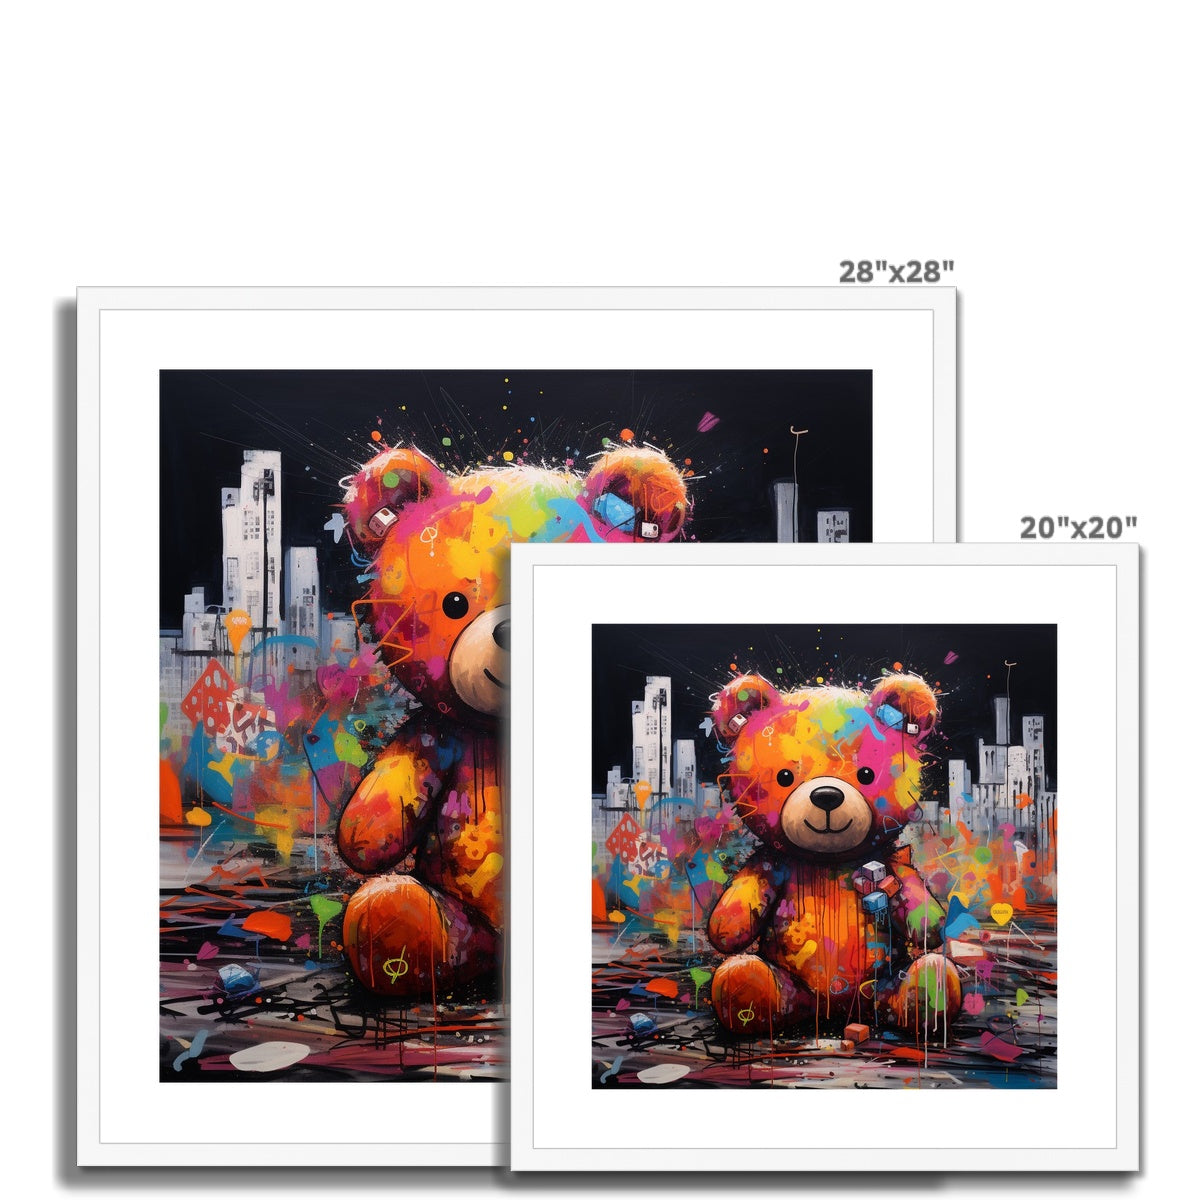 Abstract Teddy: Limited Edition Framed & Mounted Print